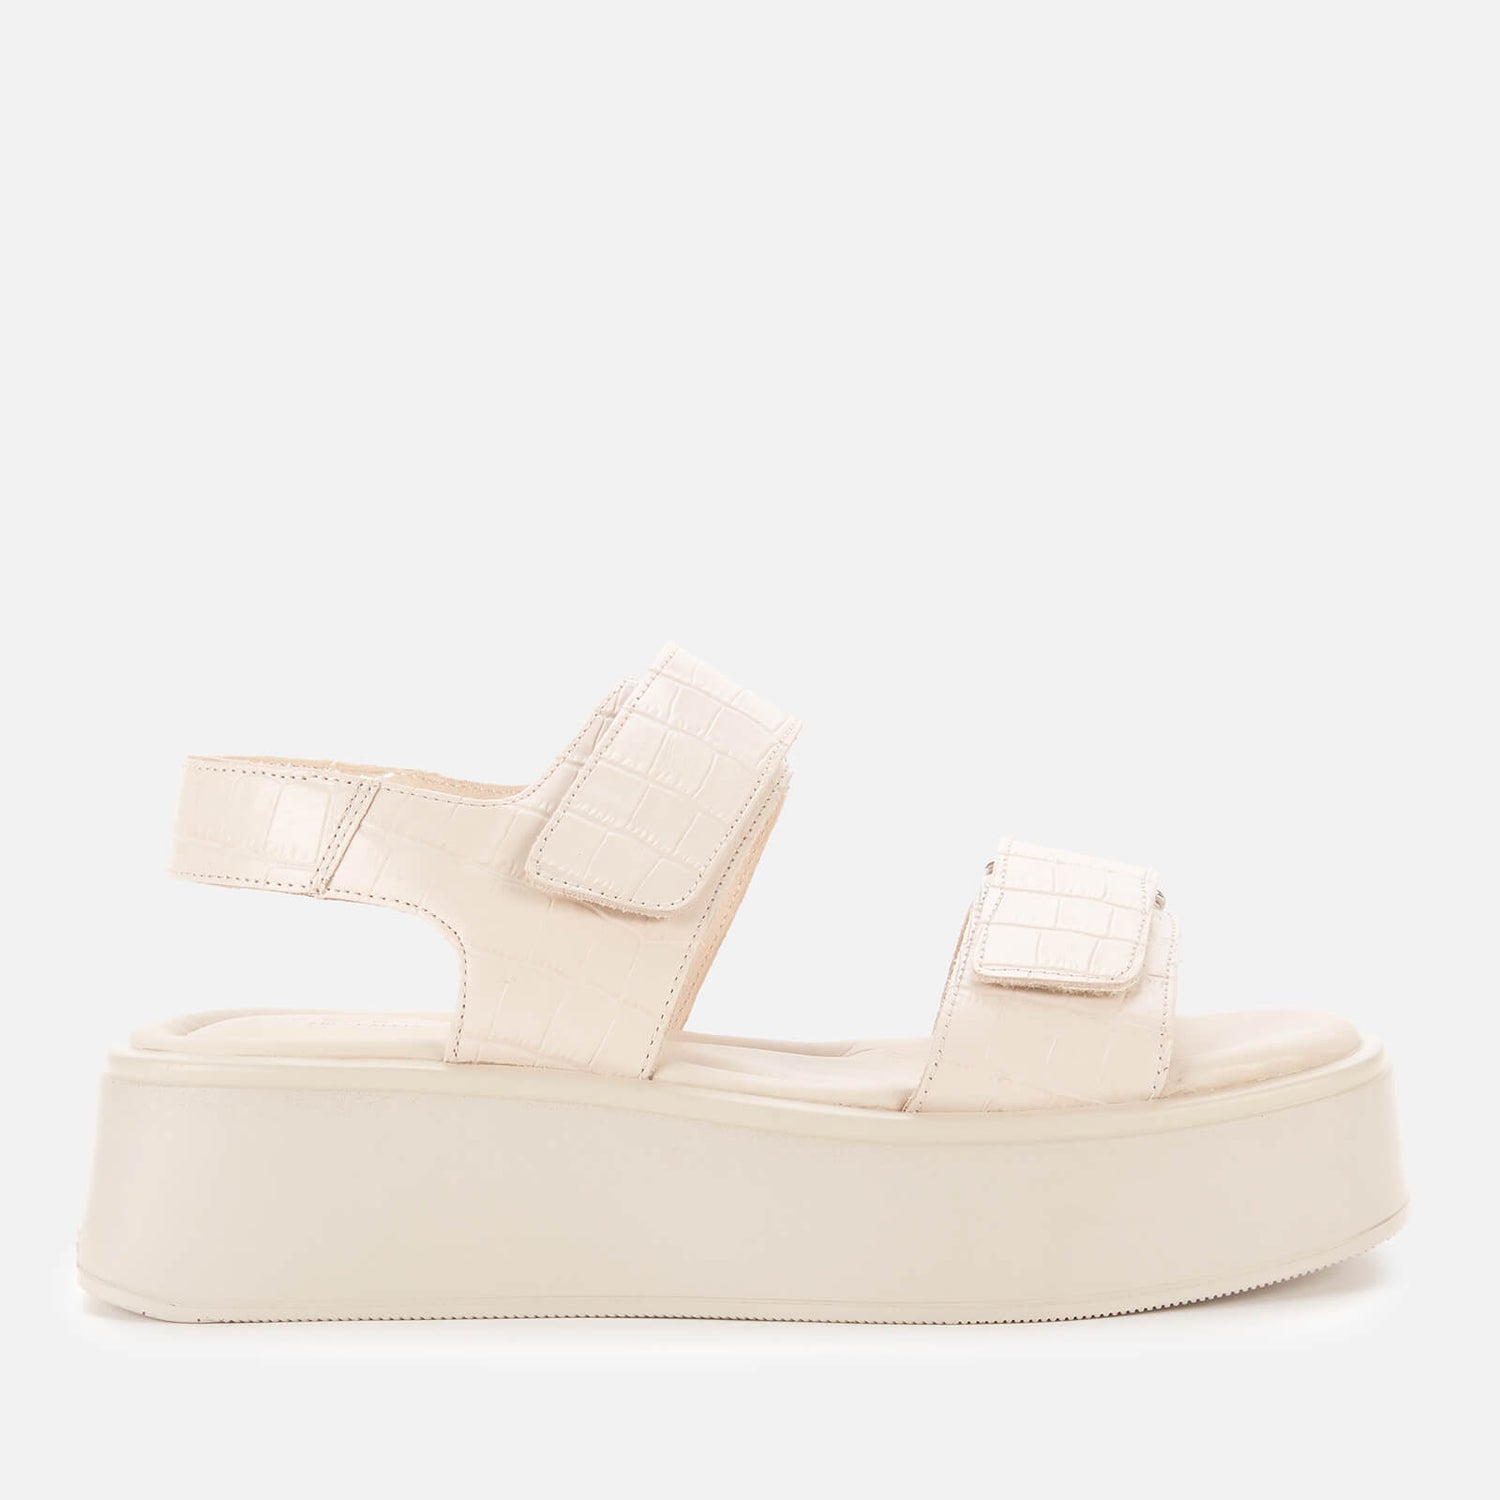 Vagabond Women's Courtney Embossed Leather Double Strap Sandals - Off White